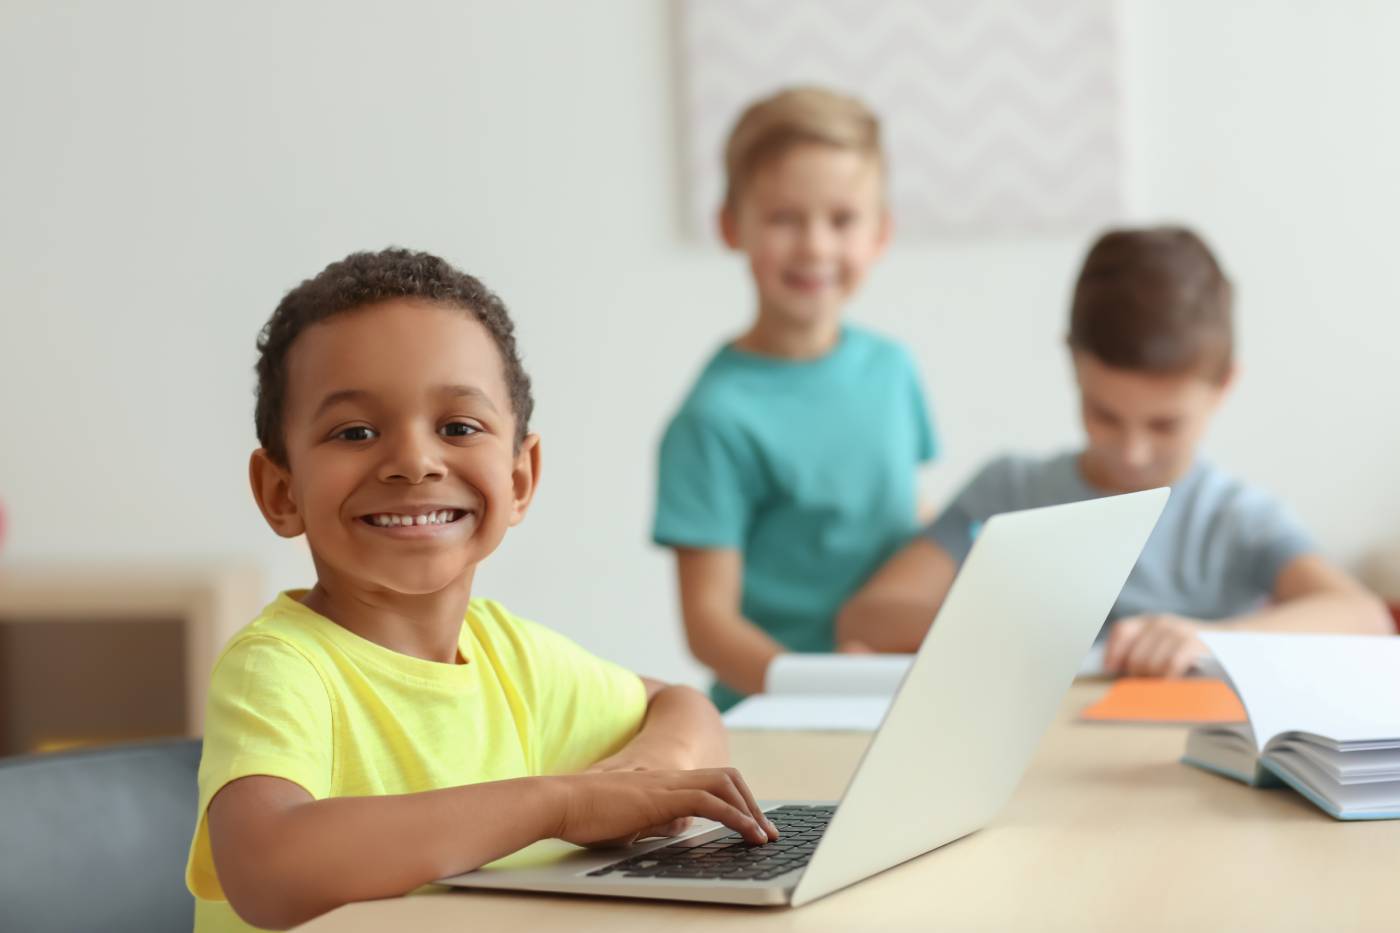 Smiling child with a laptop